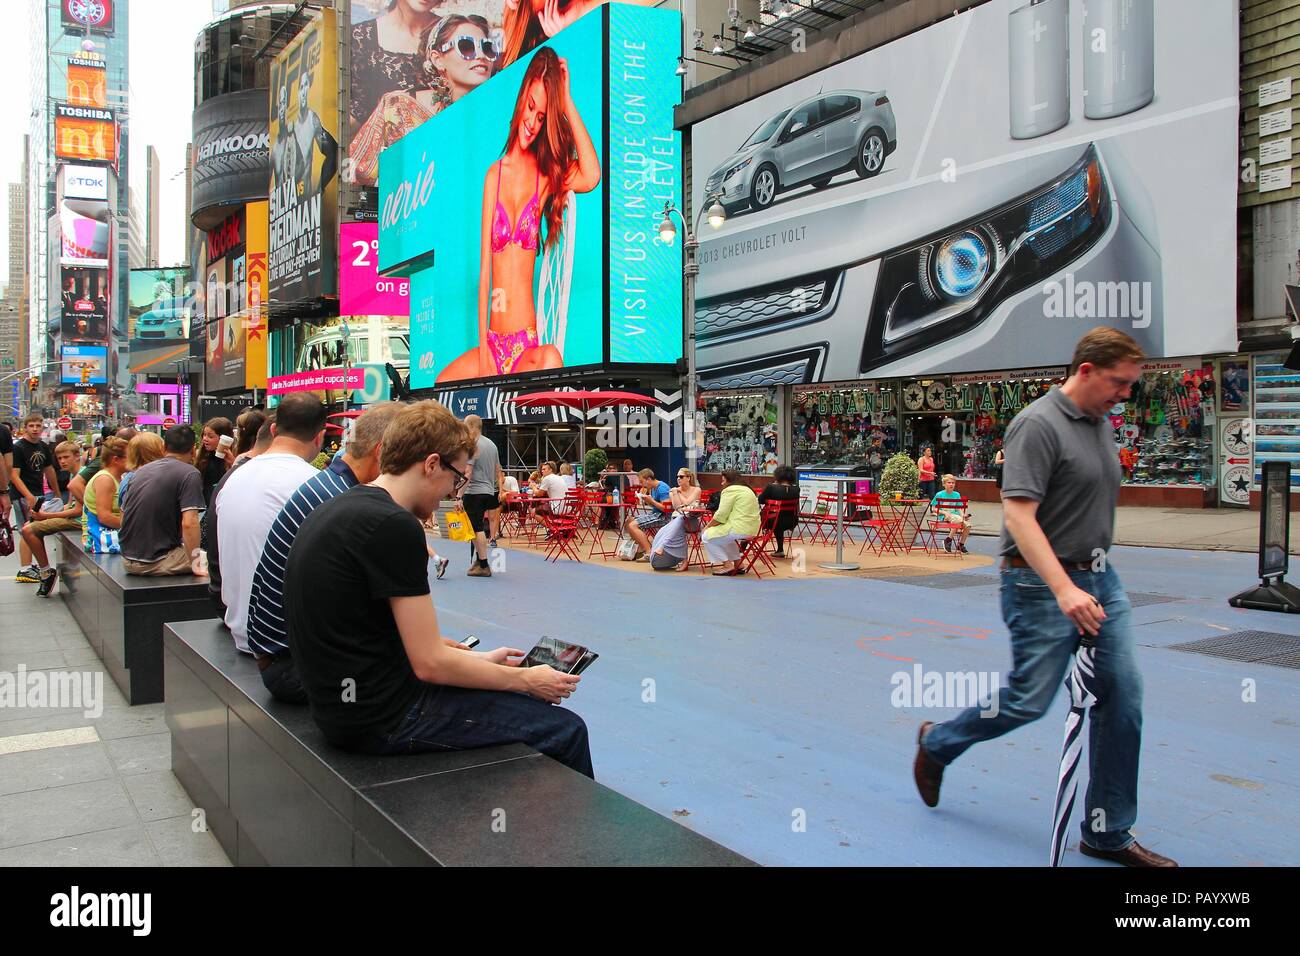 NEW YORK - JULY 3: People visit Times Square on July 3, 2013 in New York. Times Square is one of most recognized landmarks in the world. More than 300 Stock Photo